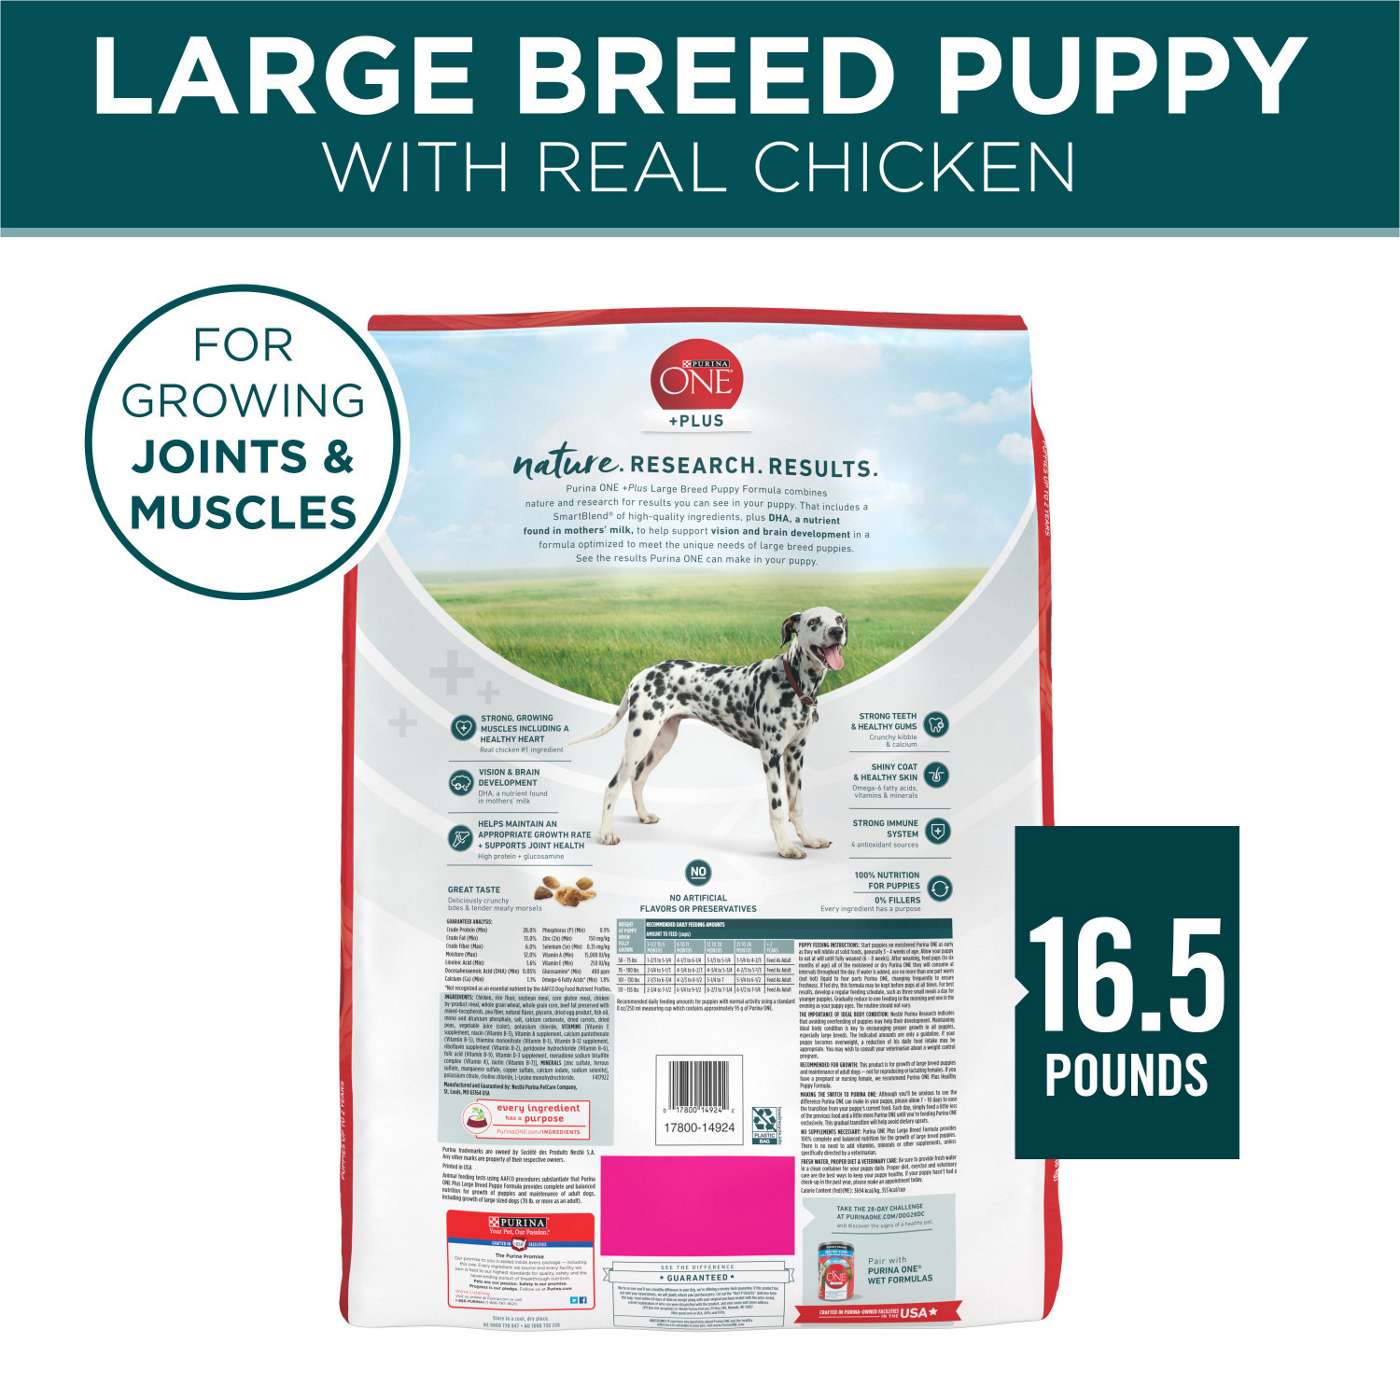 Purina ONE Purina ONE Plus Large Breed Puppy Food Dry Formula; image 3 of 6